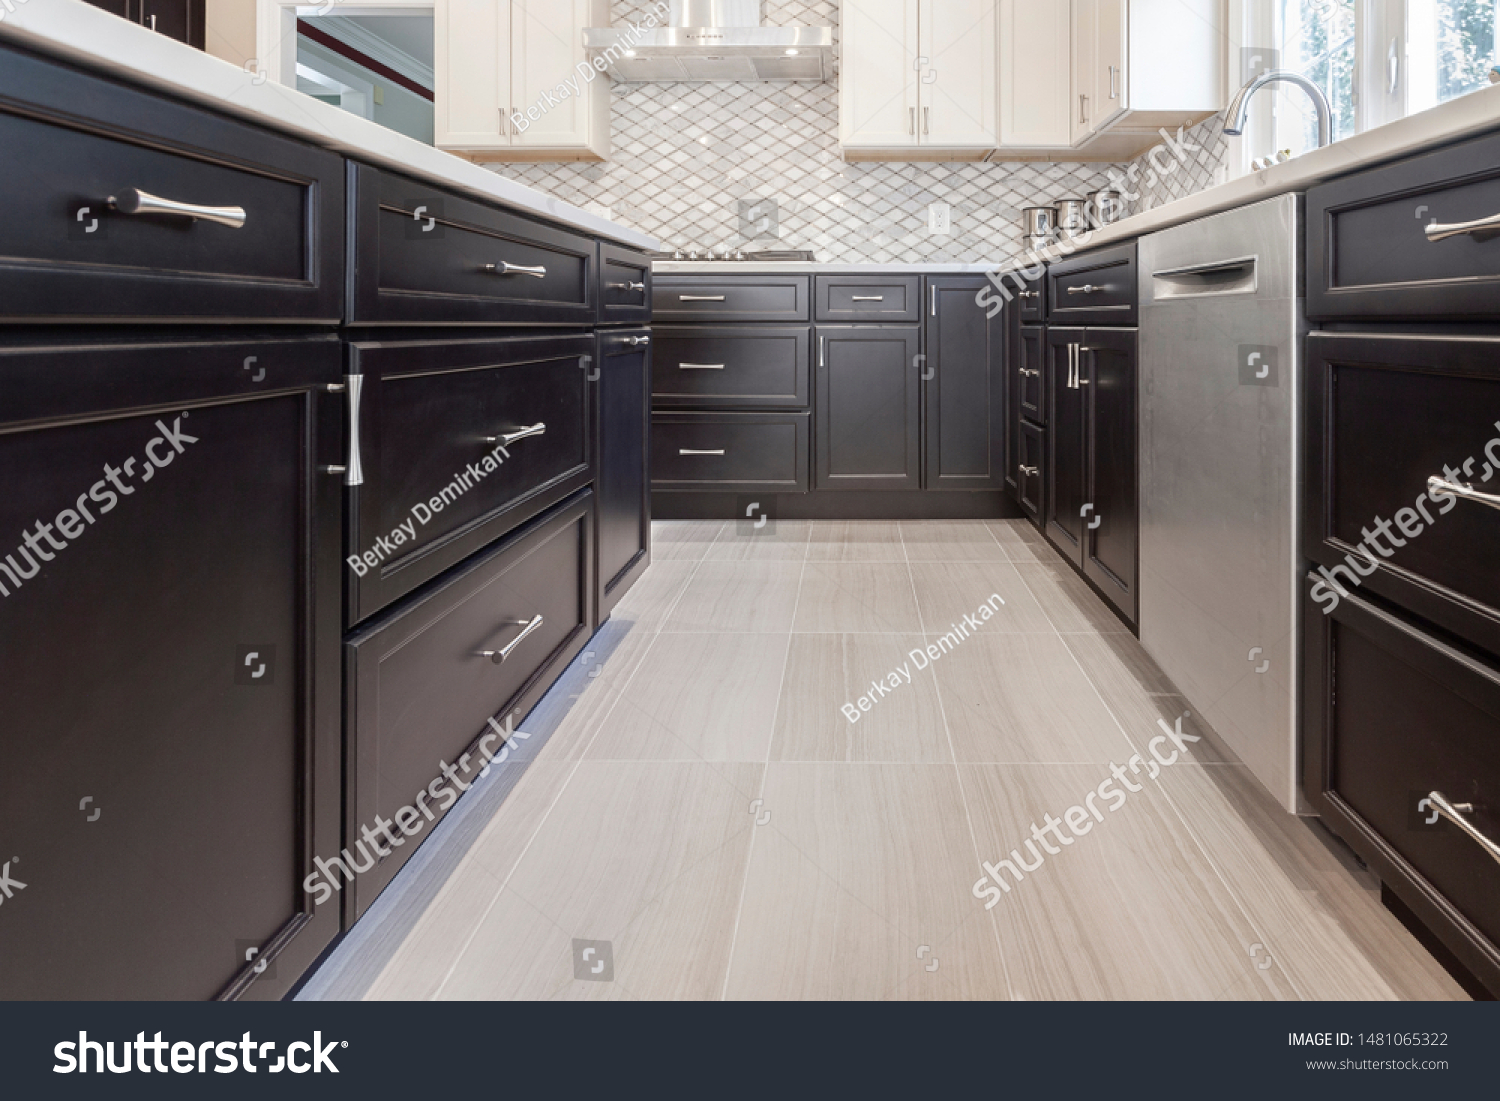 Brown / Espresso and white modern kitchen cabinets with shaker door style and stainless steel appliances with porcelain floors #1481065322